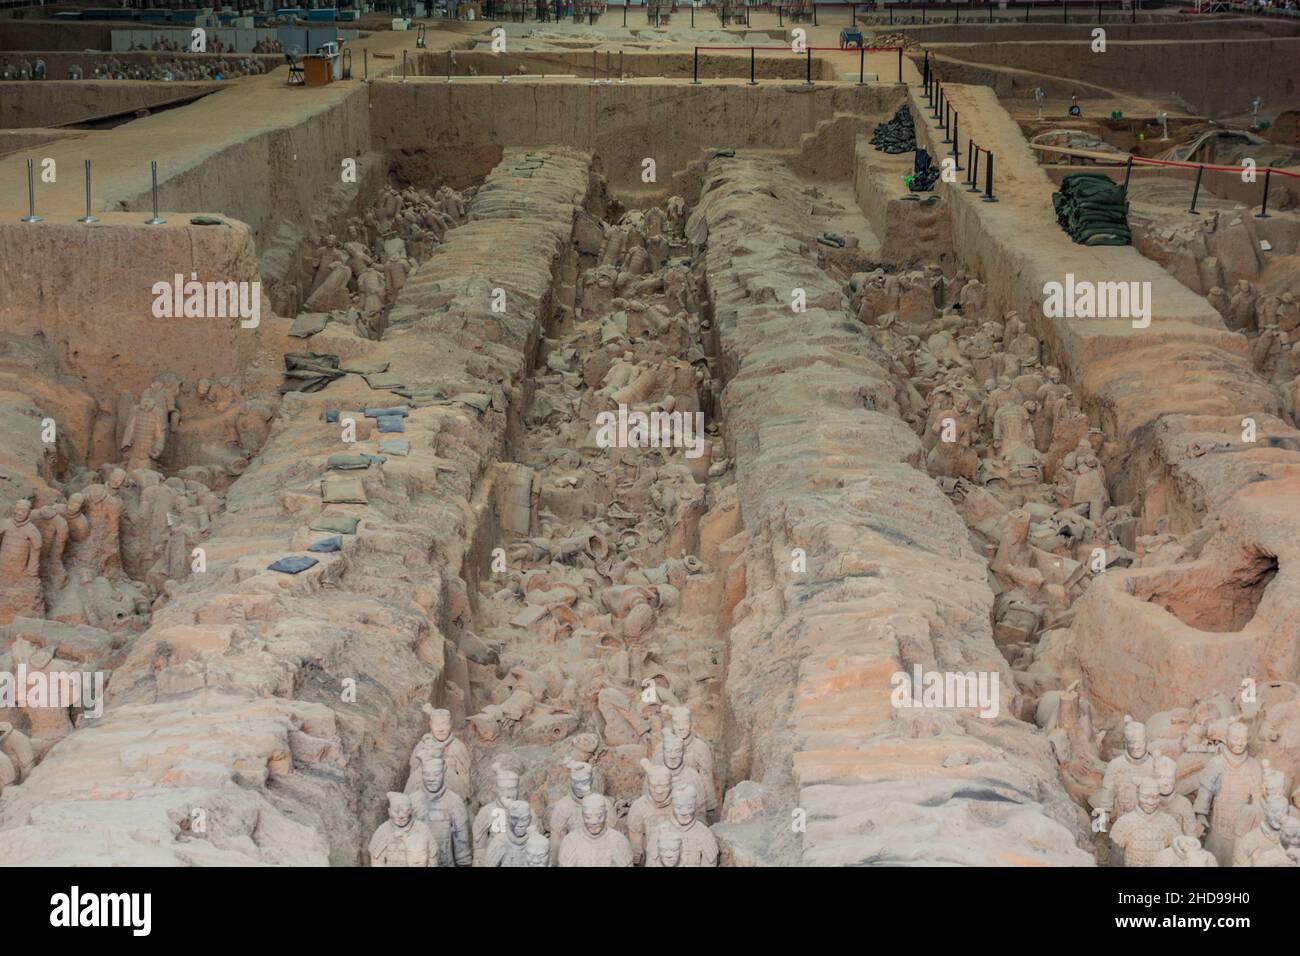 XI'AN, CHINA - AUGUST 6, 2018: Broken pieces in the Pit 1 of the Army of Terracotta Warriors near Xi'an, Shaanxi province, China Stock Photo